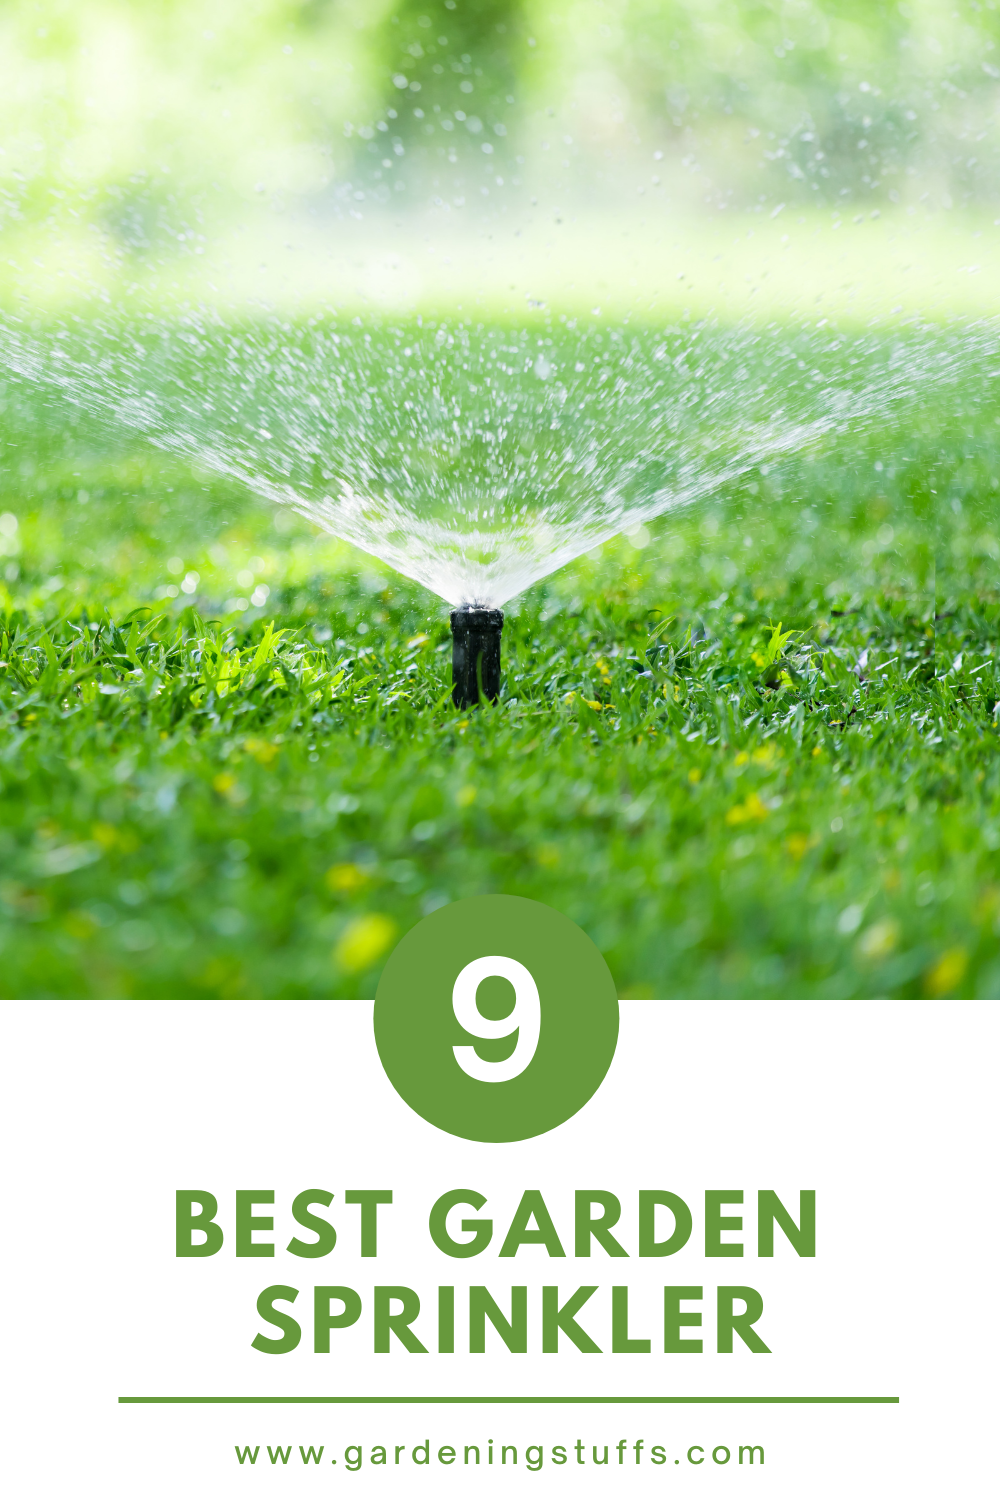 A garden sprinkler is an essential thing that you need in your garden or lawn to keep the herbs, shrubs, or plants alive and green. In this guide, I’ll review 9 options so you can get the best garden sprinkler for you. 